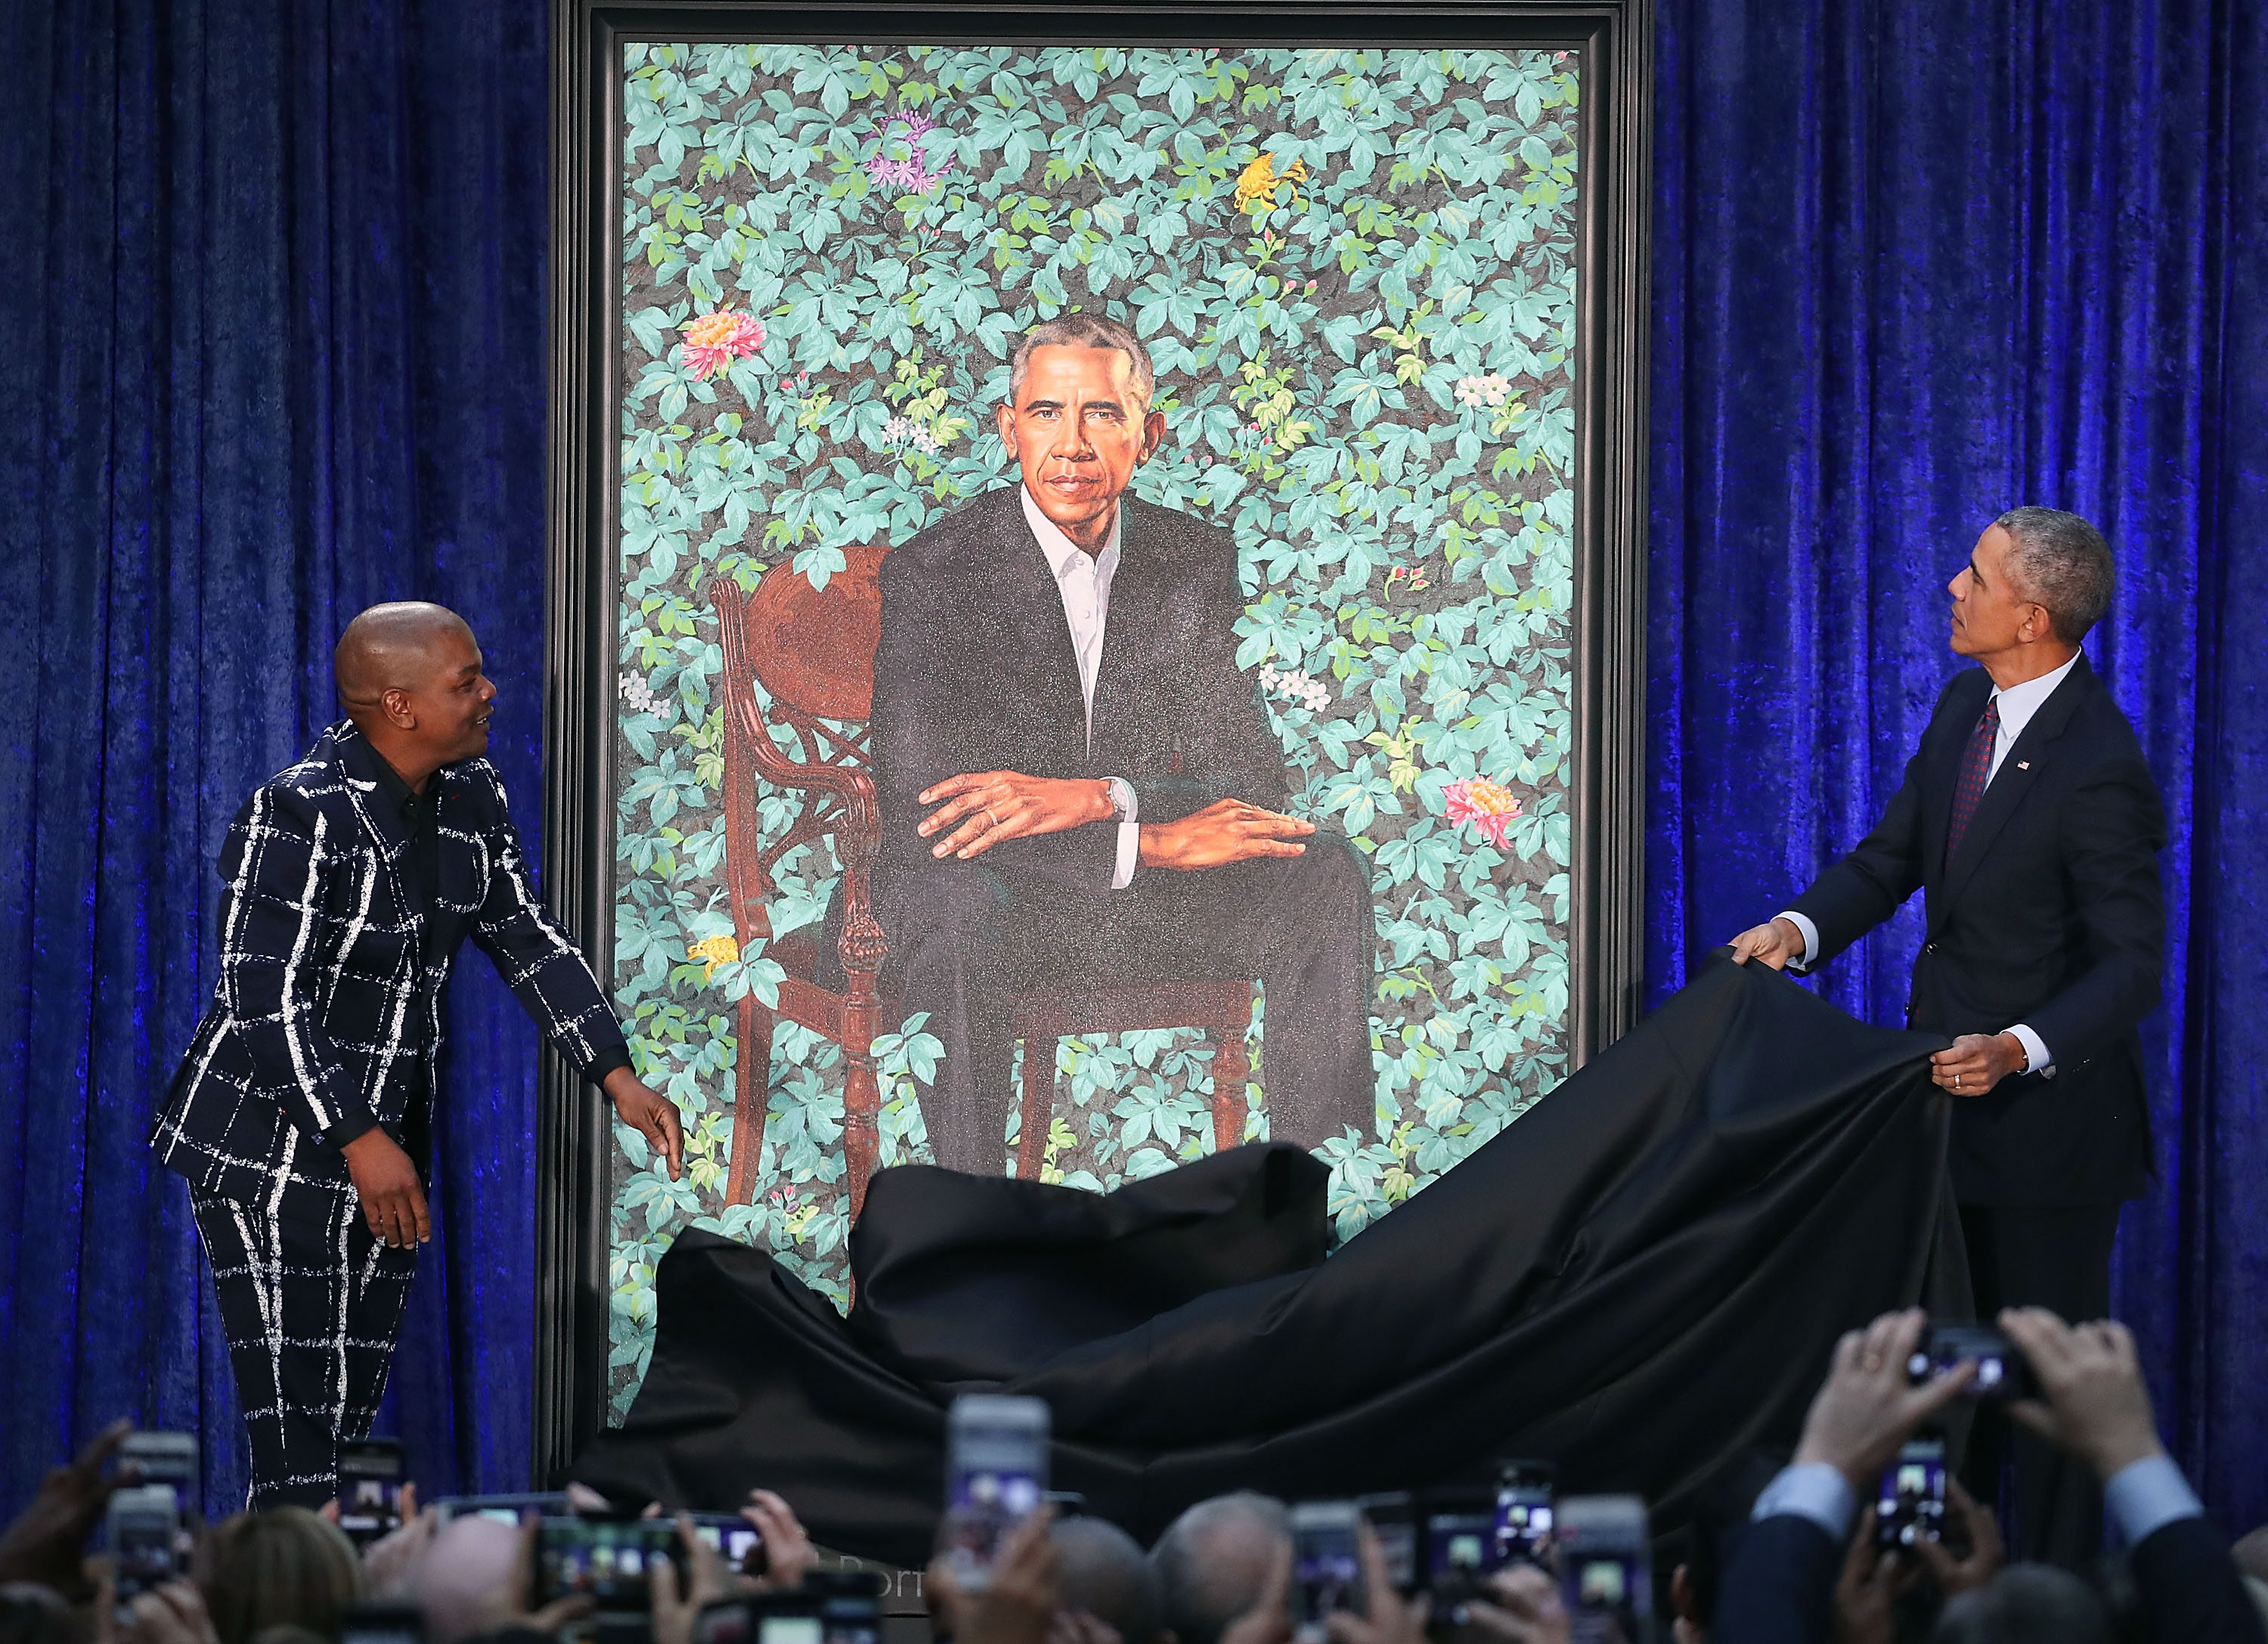 WASHINGTON, DC - FEBRUARY 12: Former U.S. President Barack Obama (R) and artist Kehinde Wiley unveil his portrait during a ceremony at the Smithsonian's National Portrait Gallery, on February 12, 2018 in Washington, DC. The portraits were commissioned by the Gallery, for Kehinde Wiley to create President Obama's portrait, and Amy Sherald that of Michelle Obama. (Photo by Mark Wilson/Getty Images)